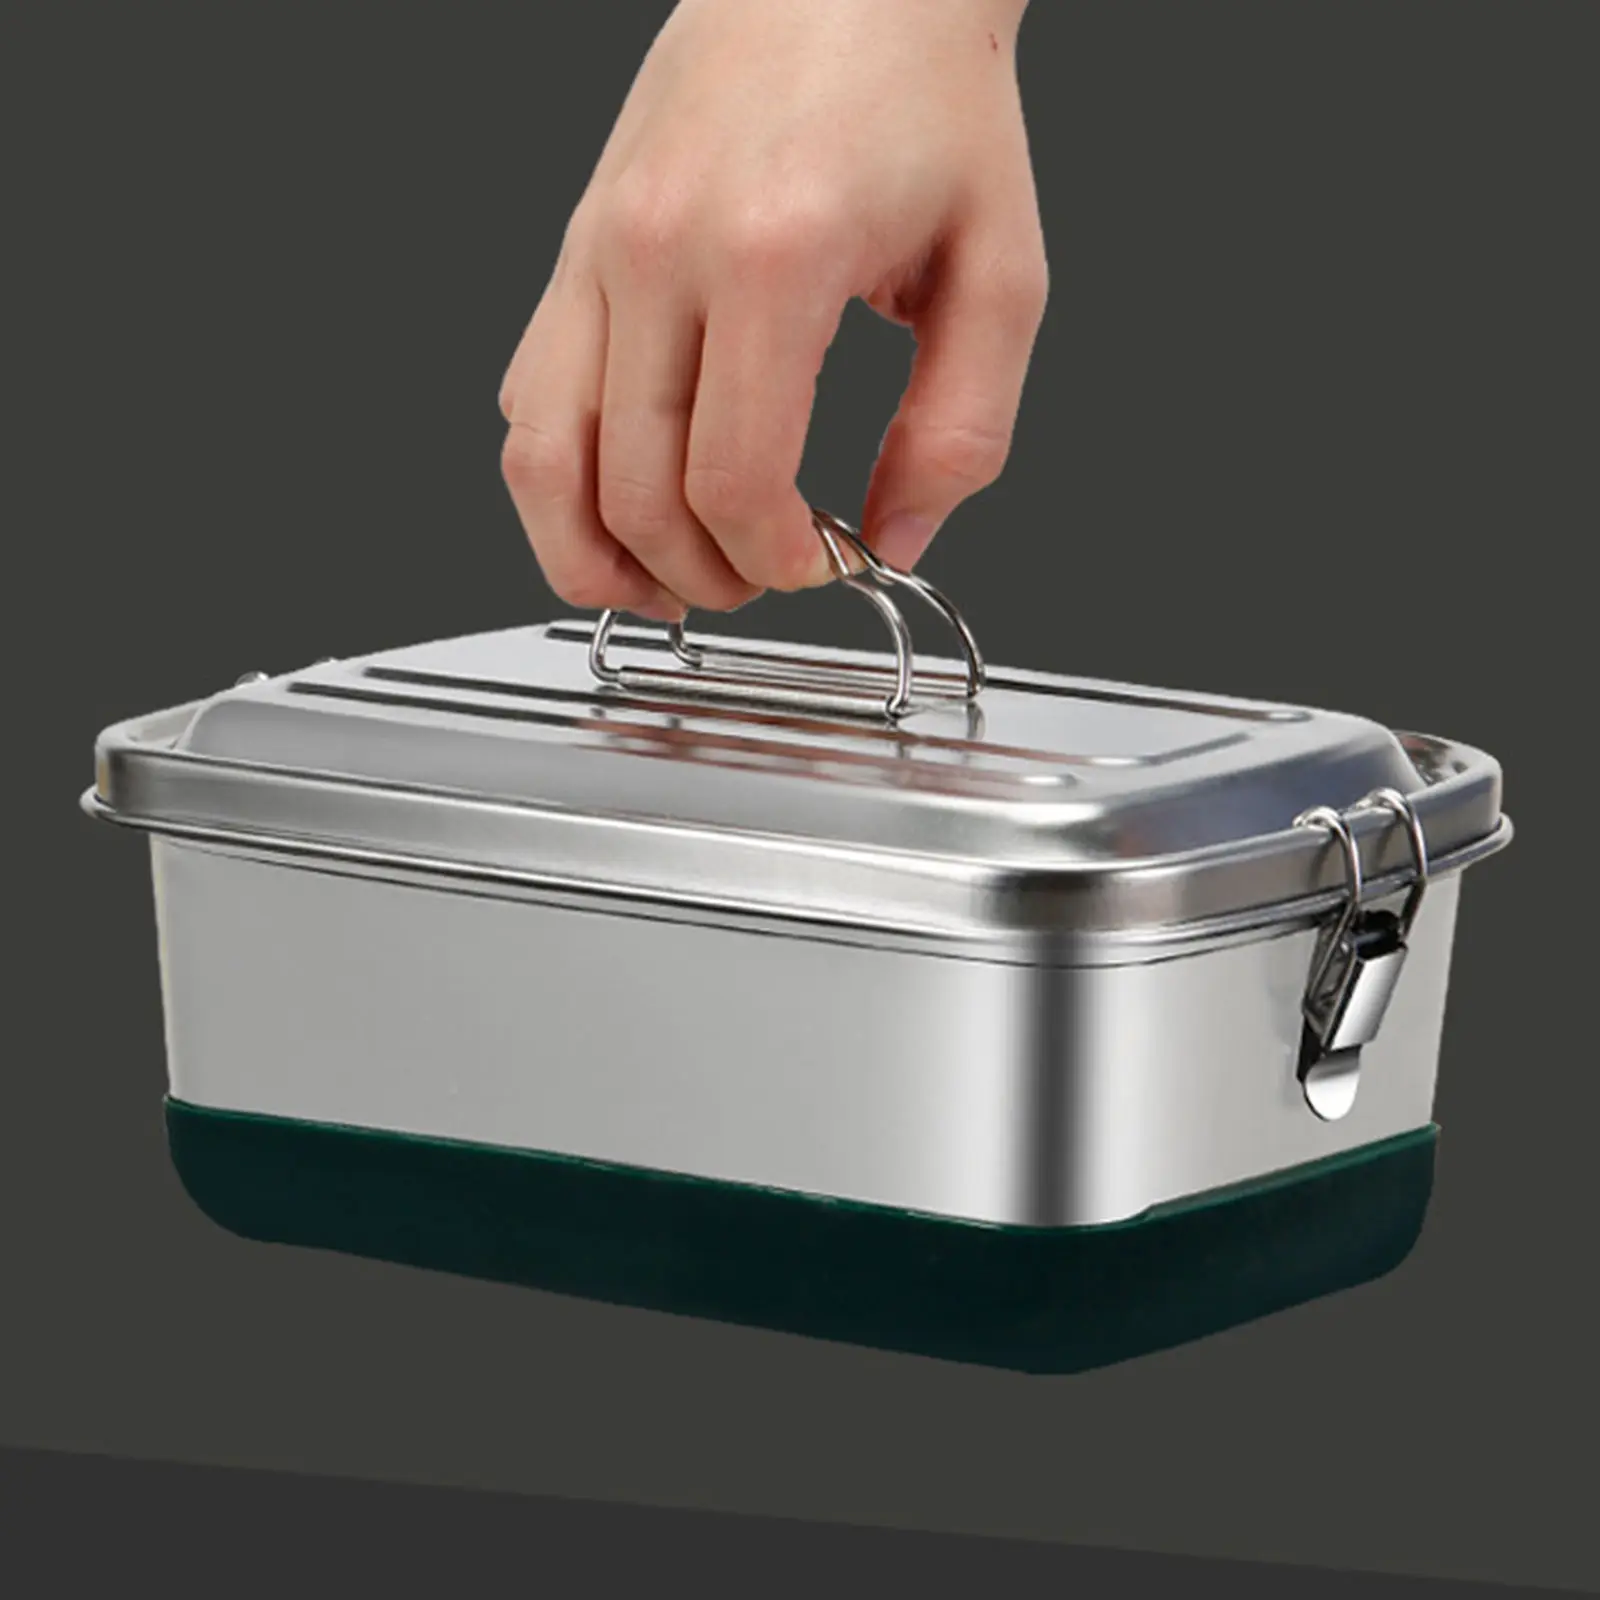 Food Container Sandwich Bento Dinnerware Stainless Steel For Kids Adults Lunch Box School Office Kitchen Sealed Storage